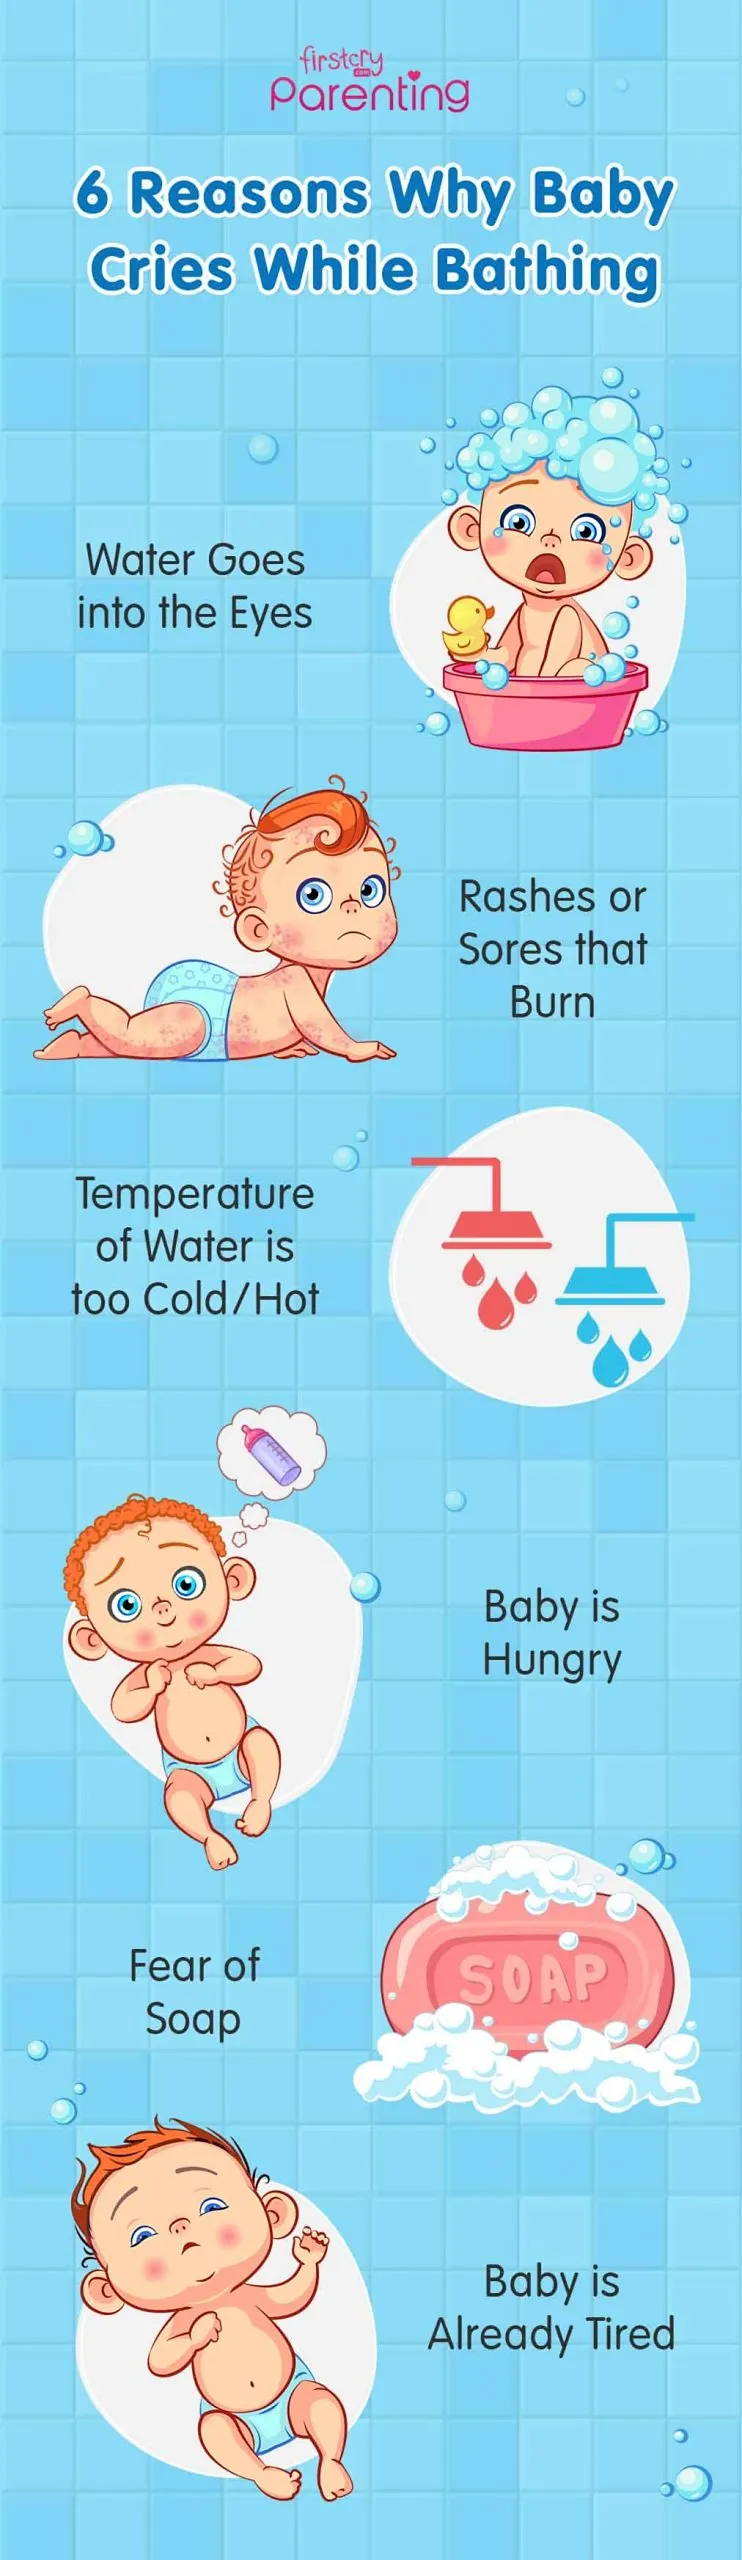 6 Reasons Why Baby Cries While Bathing